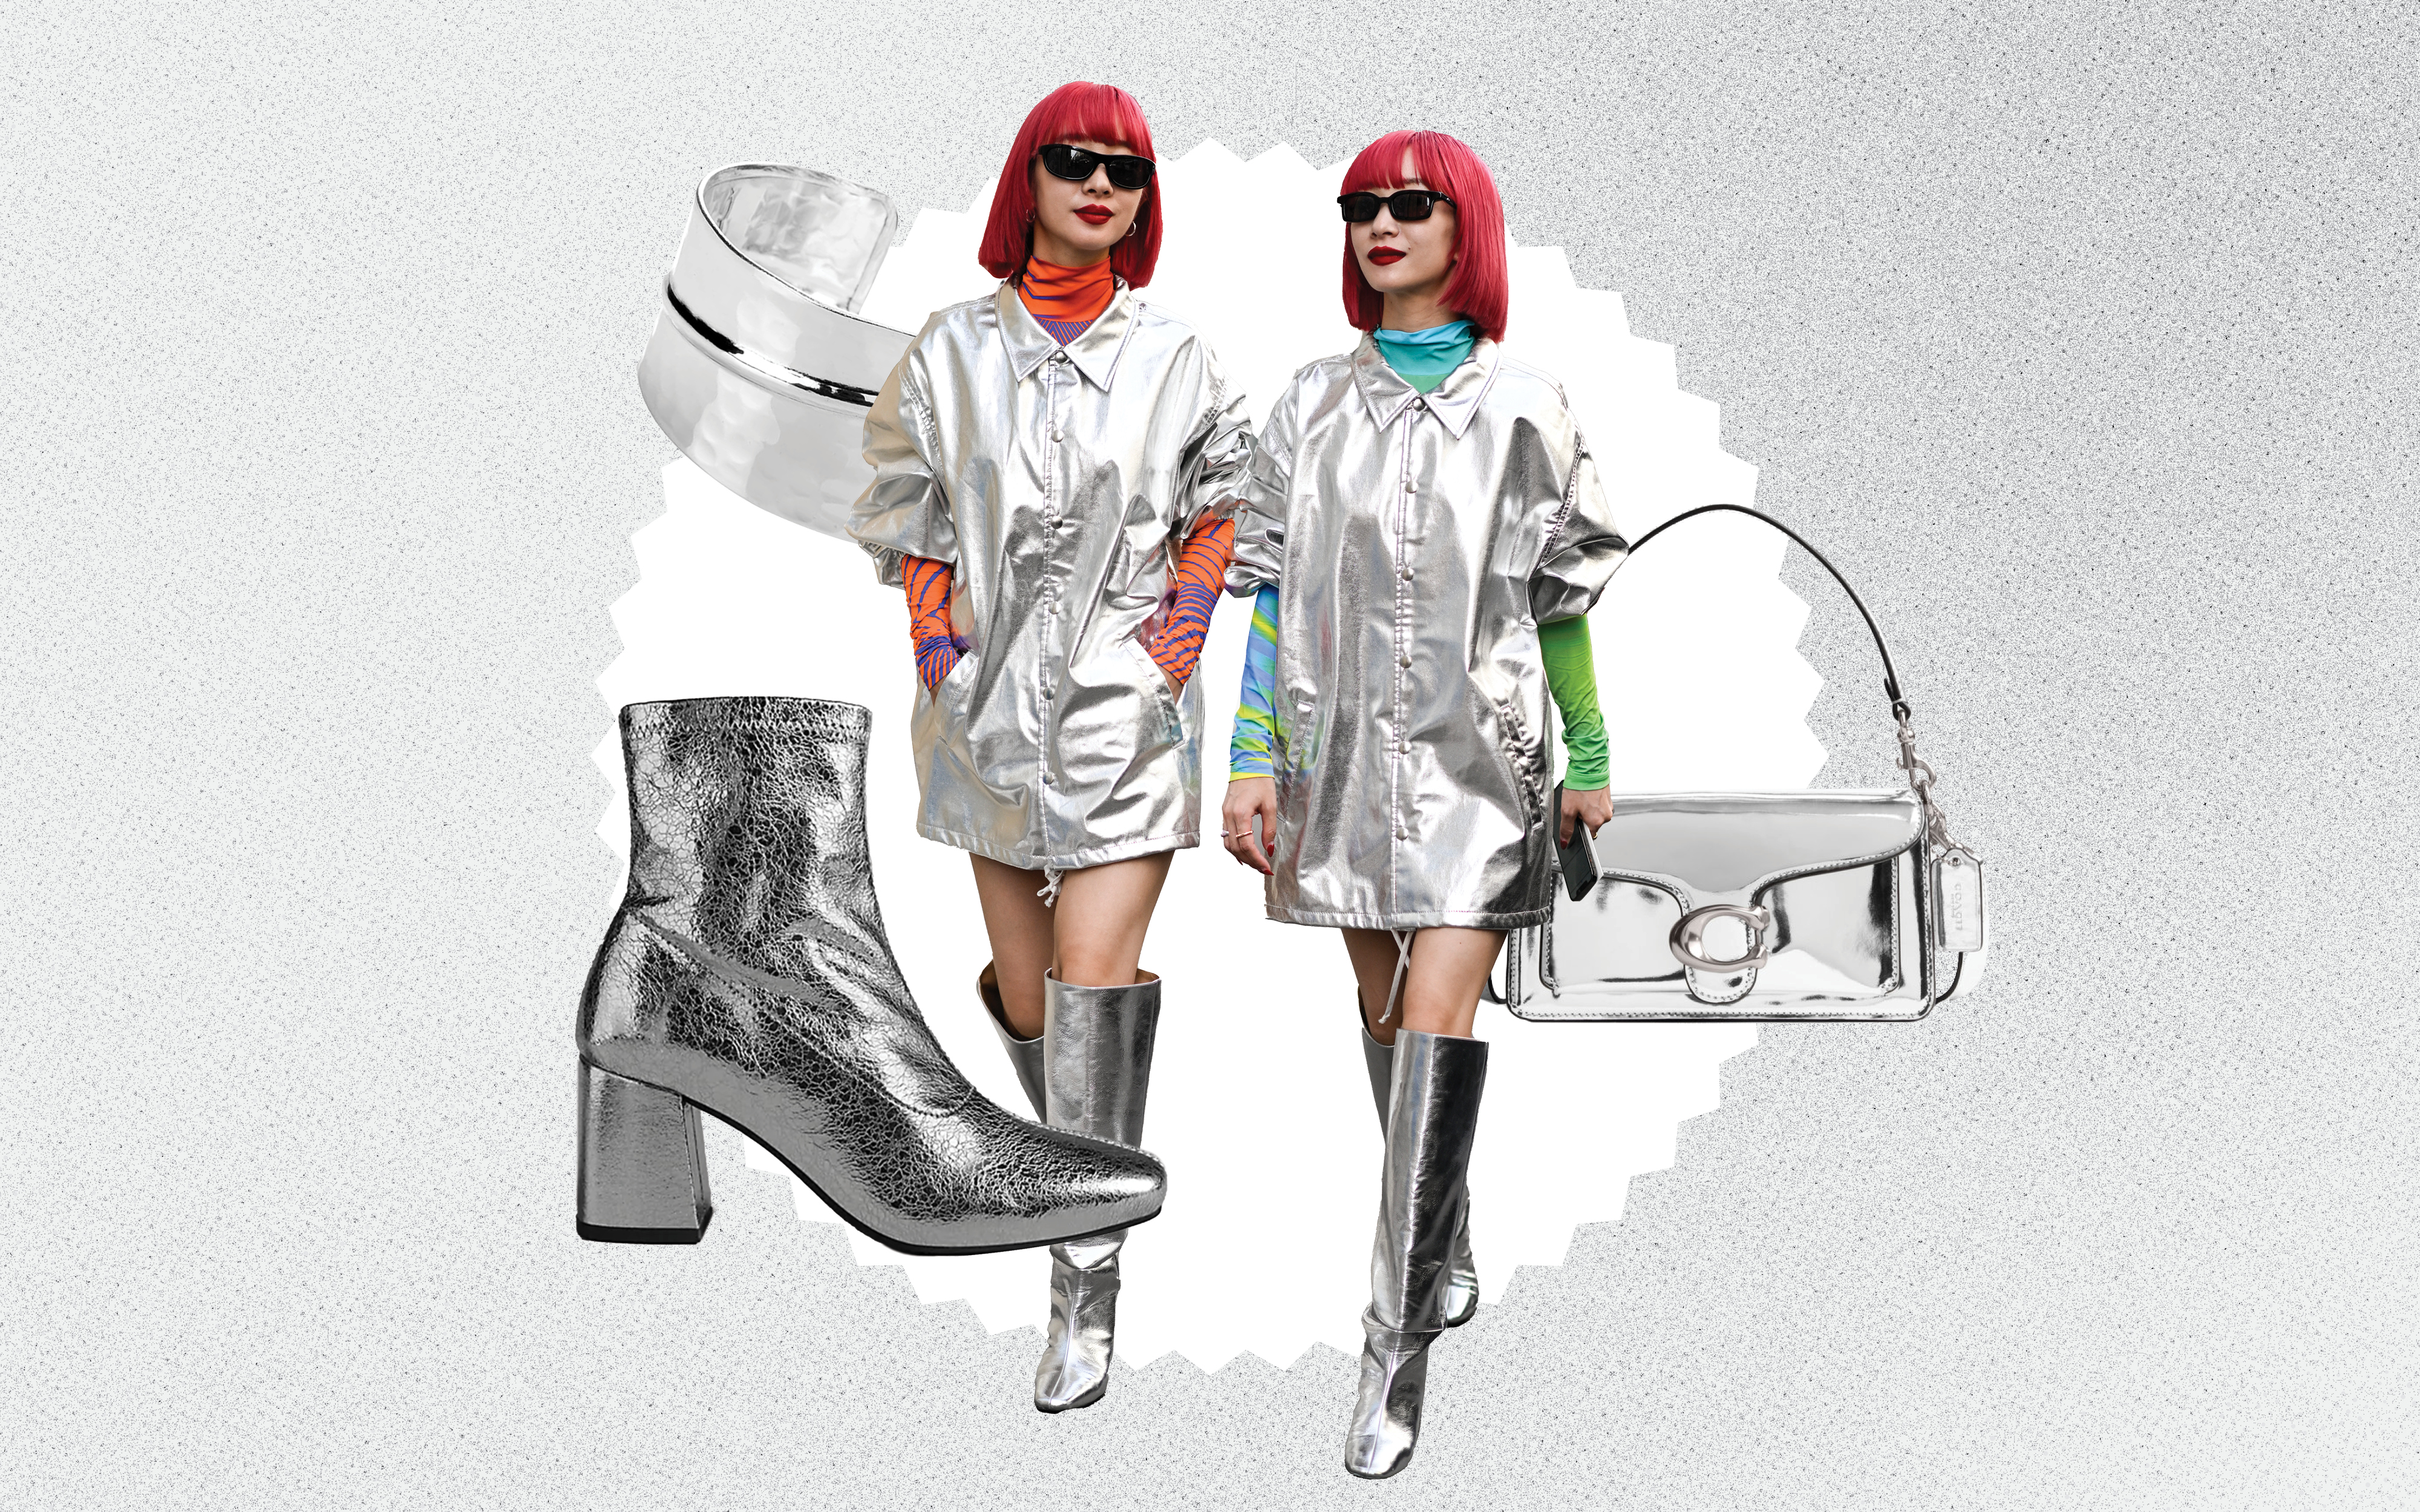 Metallic Is the Shiny New Fashion Trend We Need in Our Closet